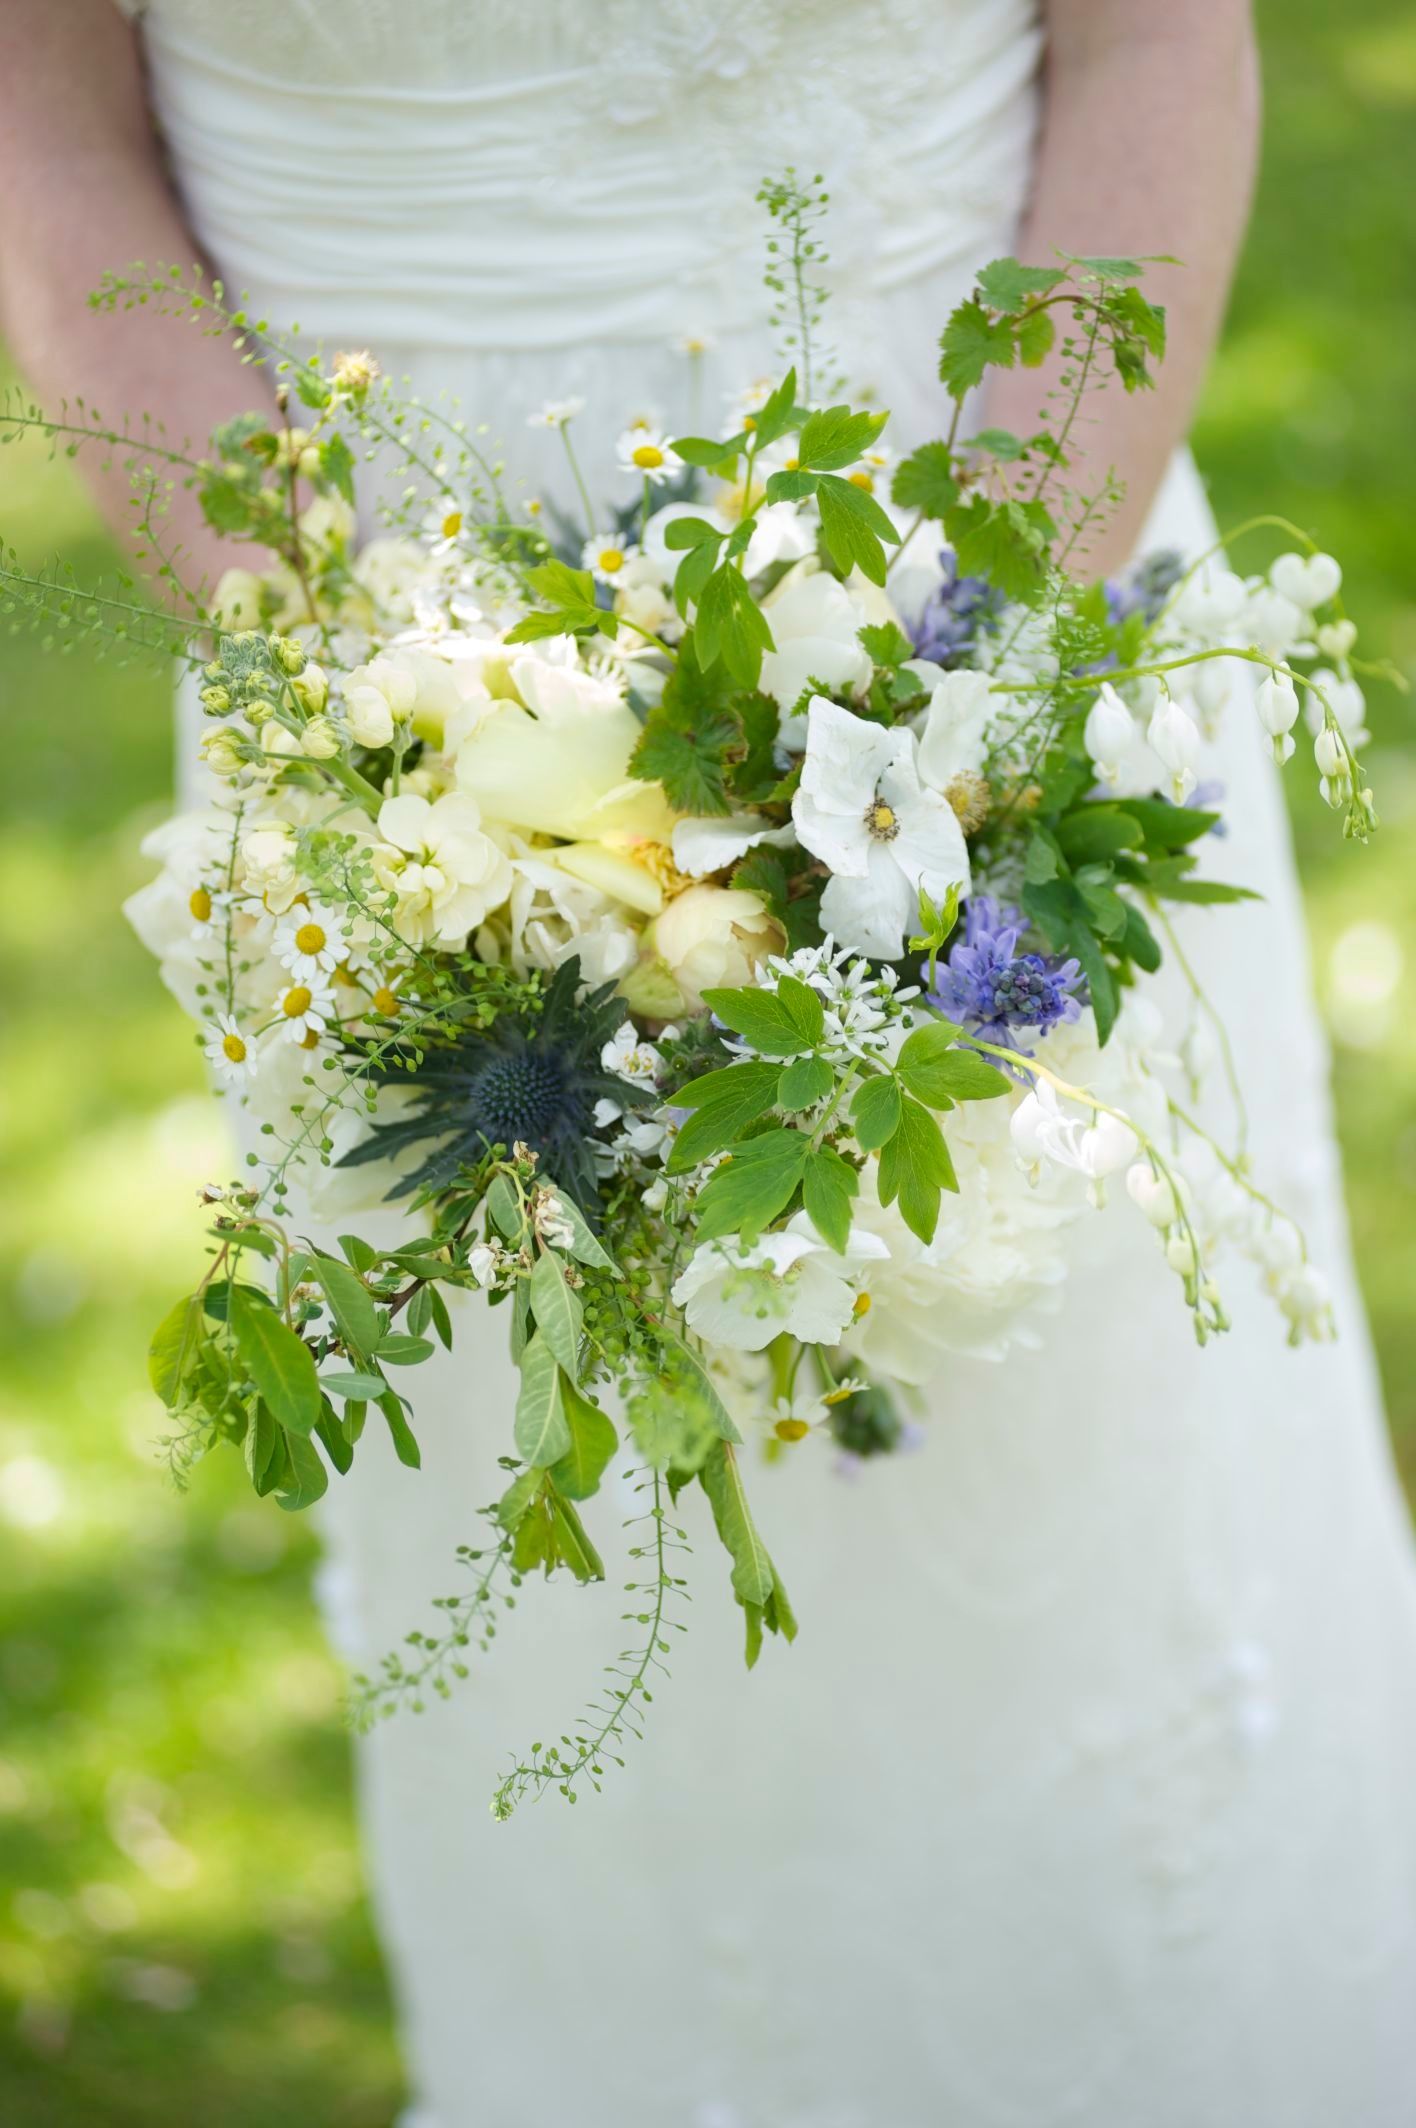 Wild and natural green and white bouquet | Bouquet | Pinterest ...